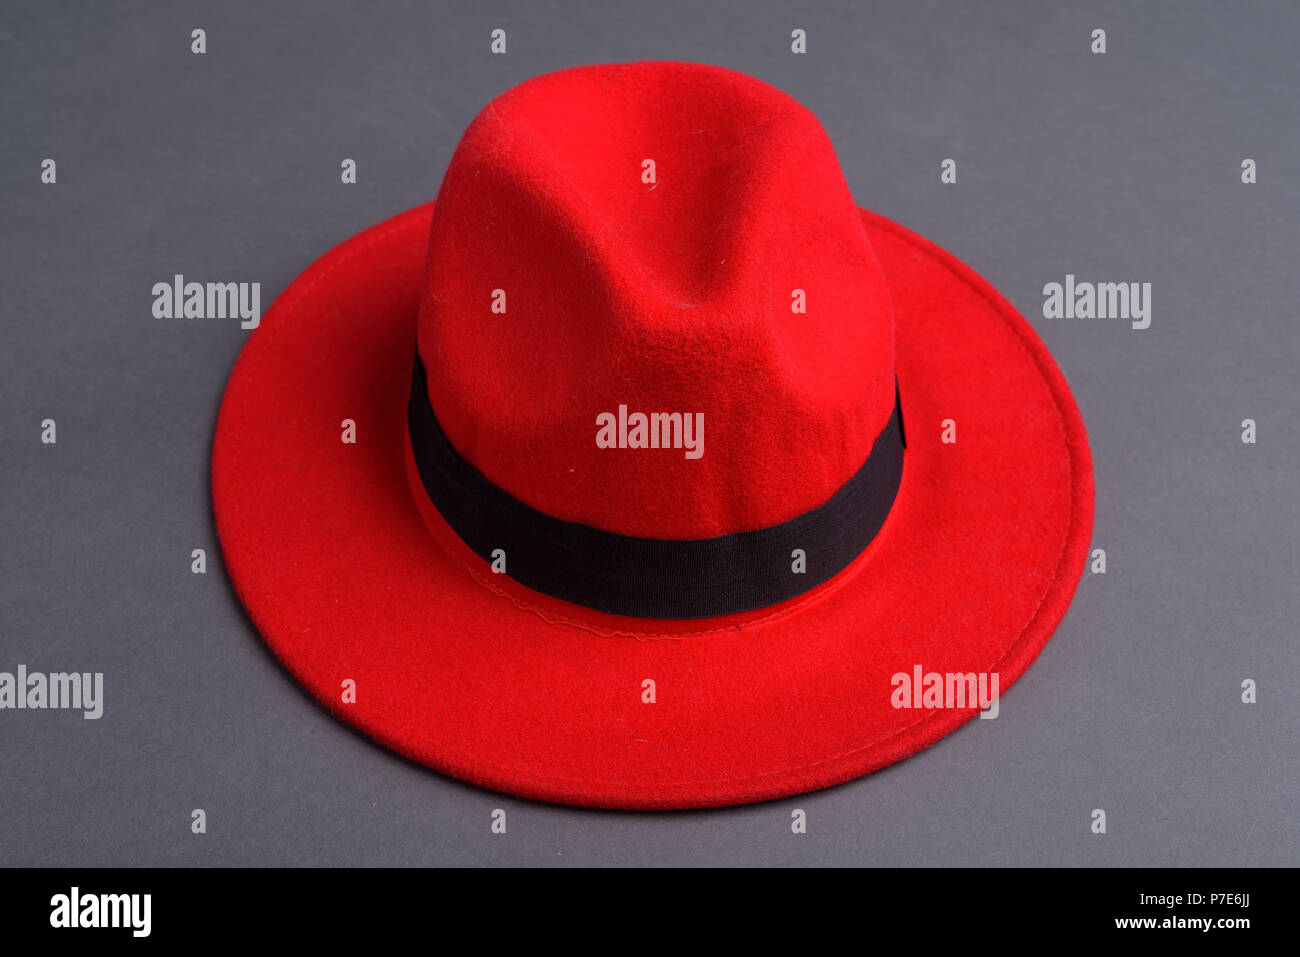 Red Hat Against Gray Background Stock Photo